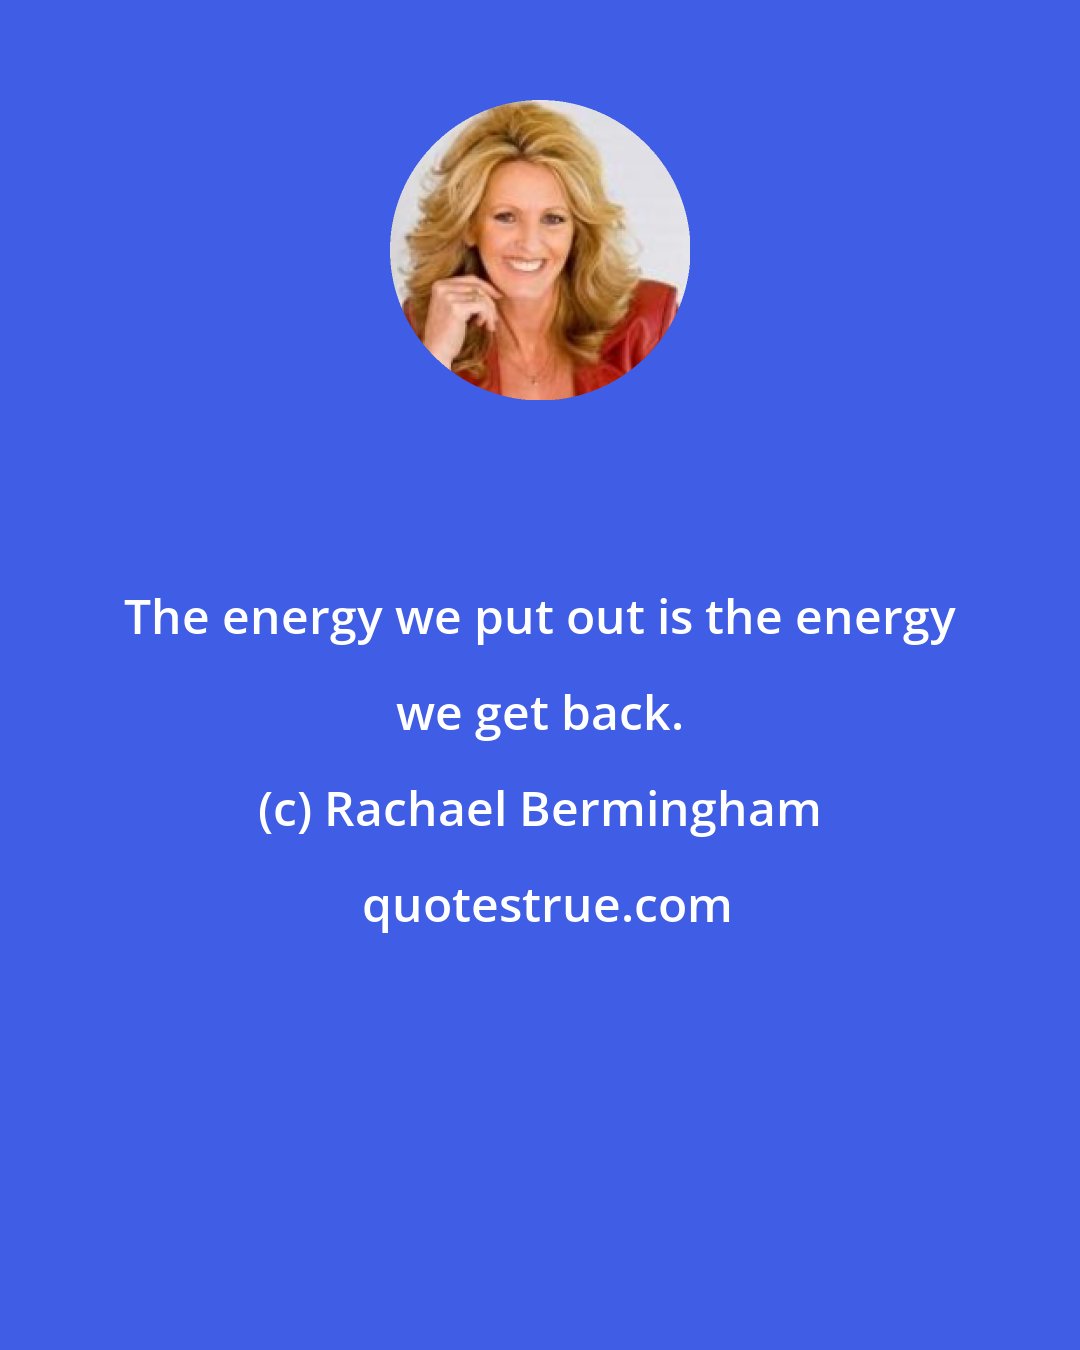 Rachael Bermingham: The energy we put out is the energy we get back.